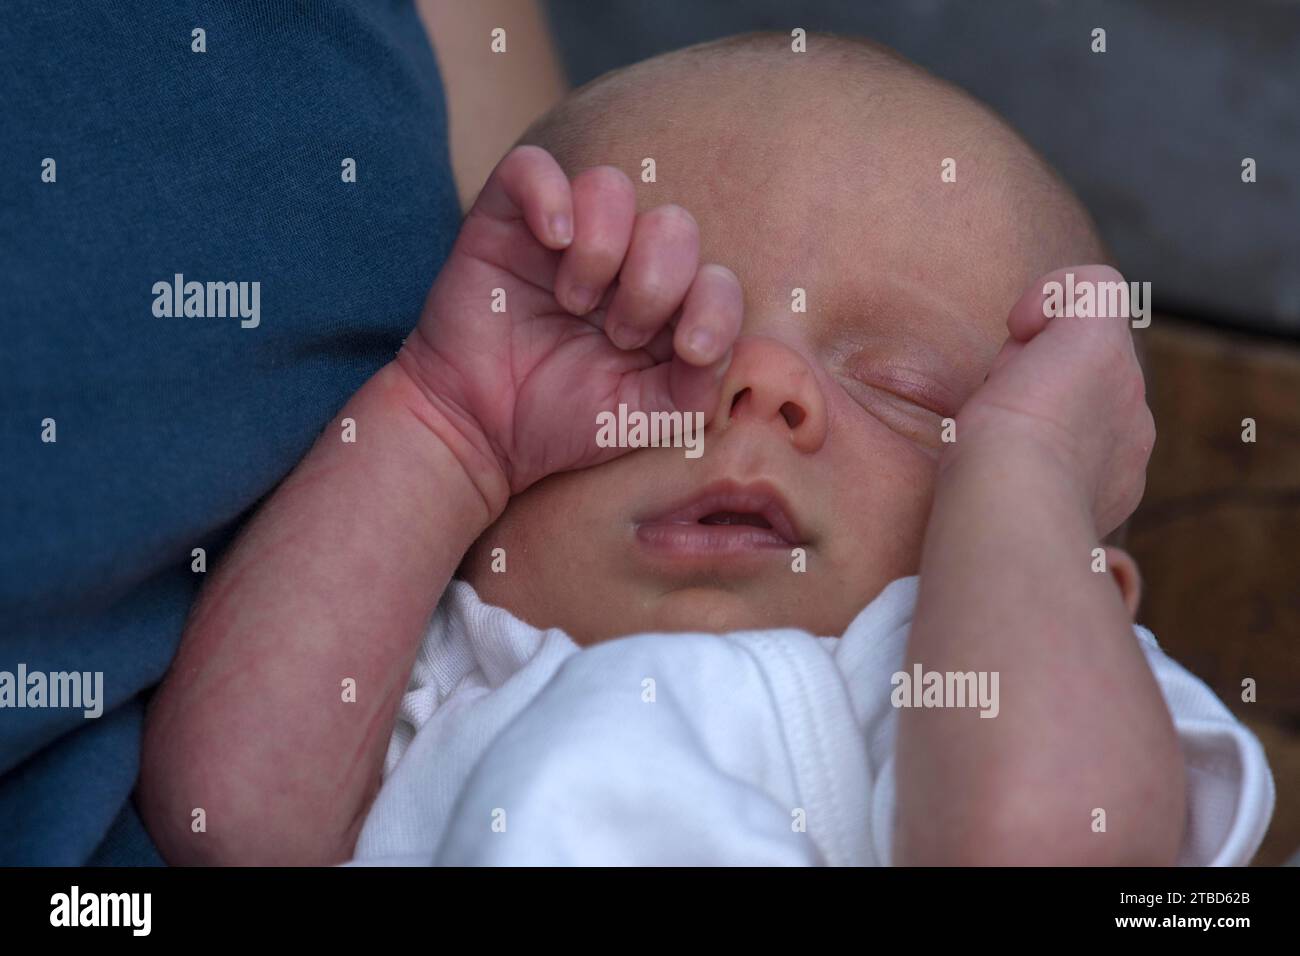 Infant rubbing his eye with his hand, Mecklenburg-Vorpommern, Germany Stock Photo